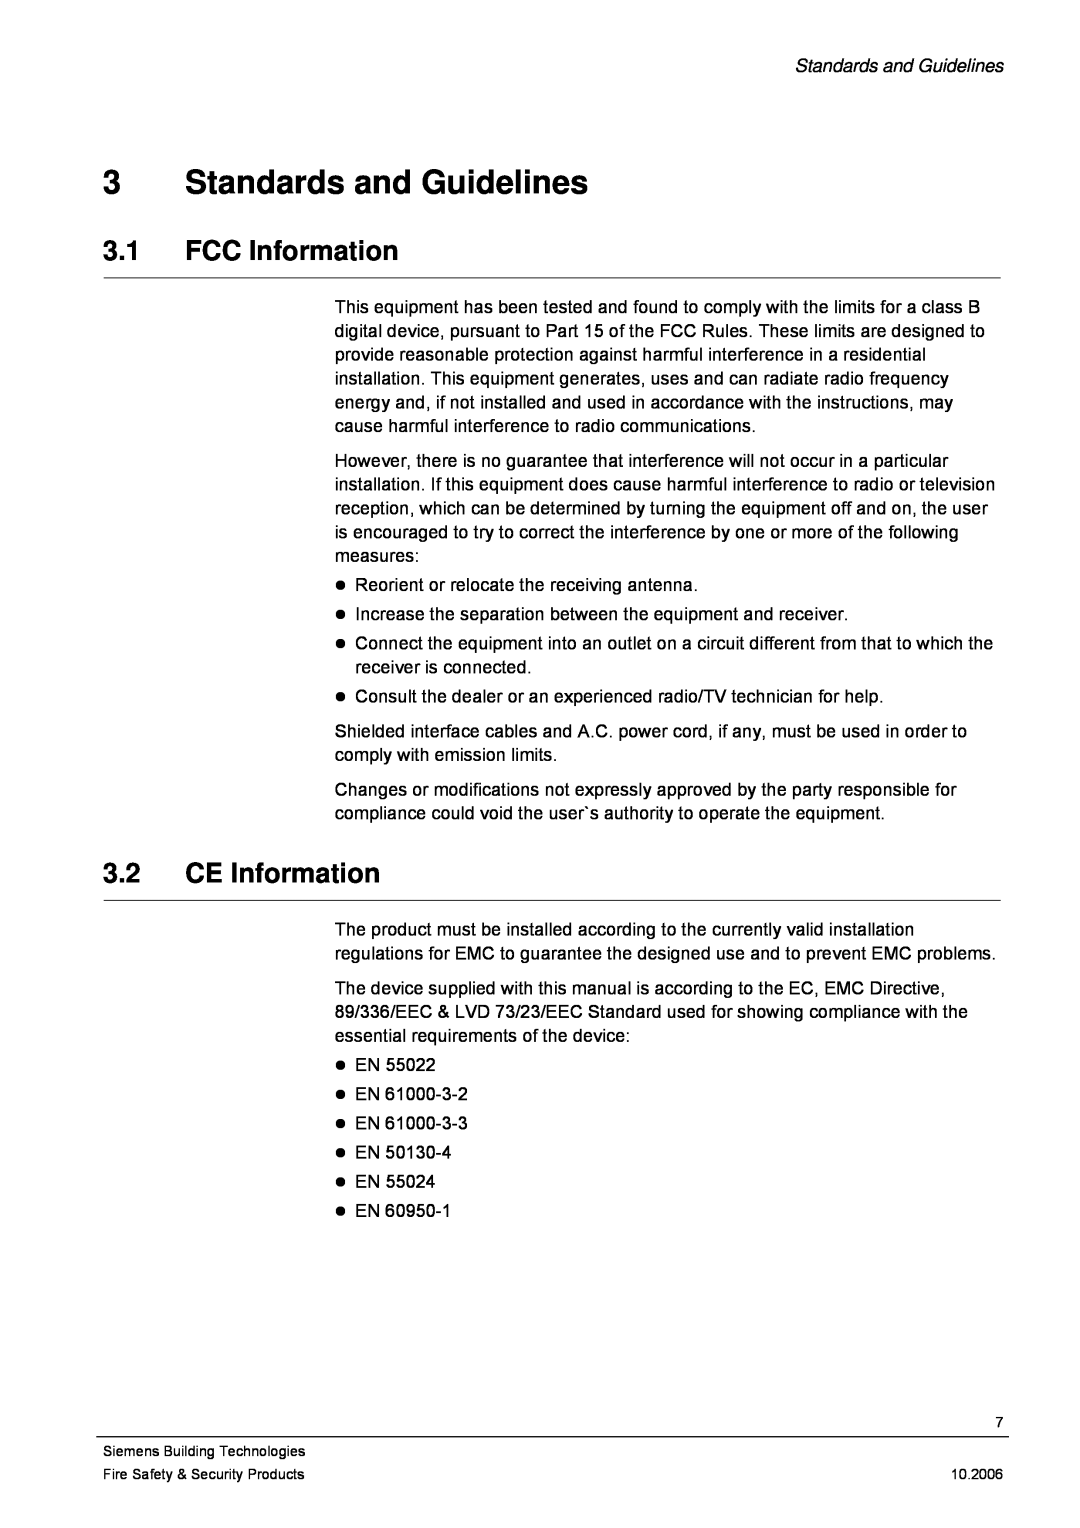 Siemens CMTC1920, CMTC1720 user manual Standards and Guidelines, FCC Information, CE Information 